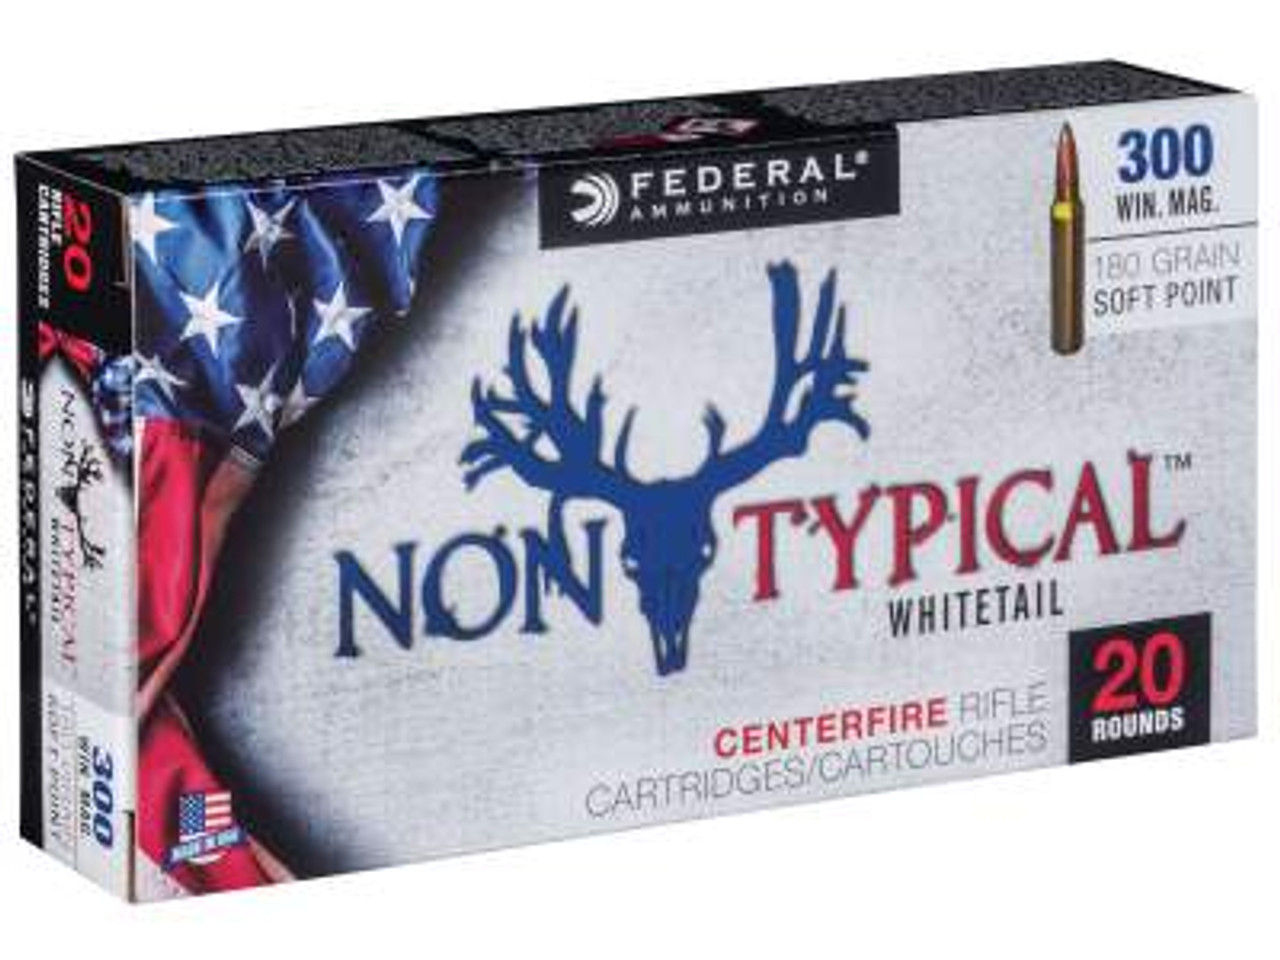 Federal 300 Win Mag Ammunition Non Typical F300wdt180 180 Grain Soft Point 20 Rounds 